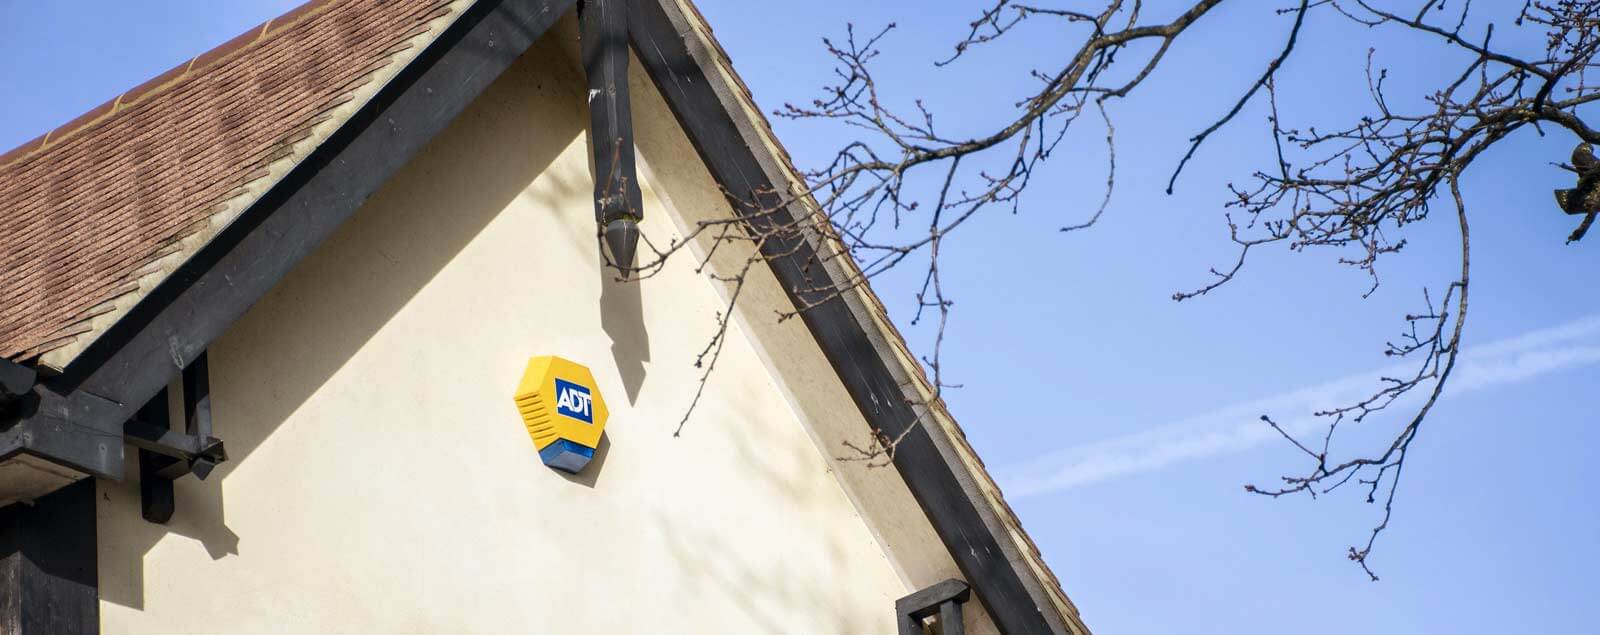 ADT alarm mounted on exterior wall